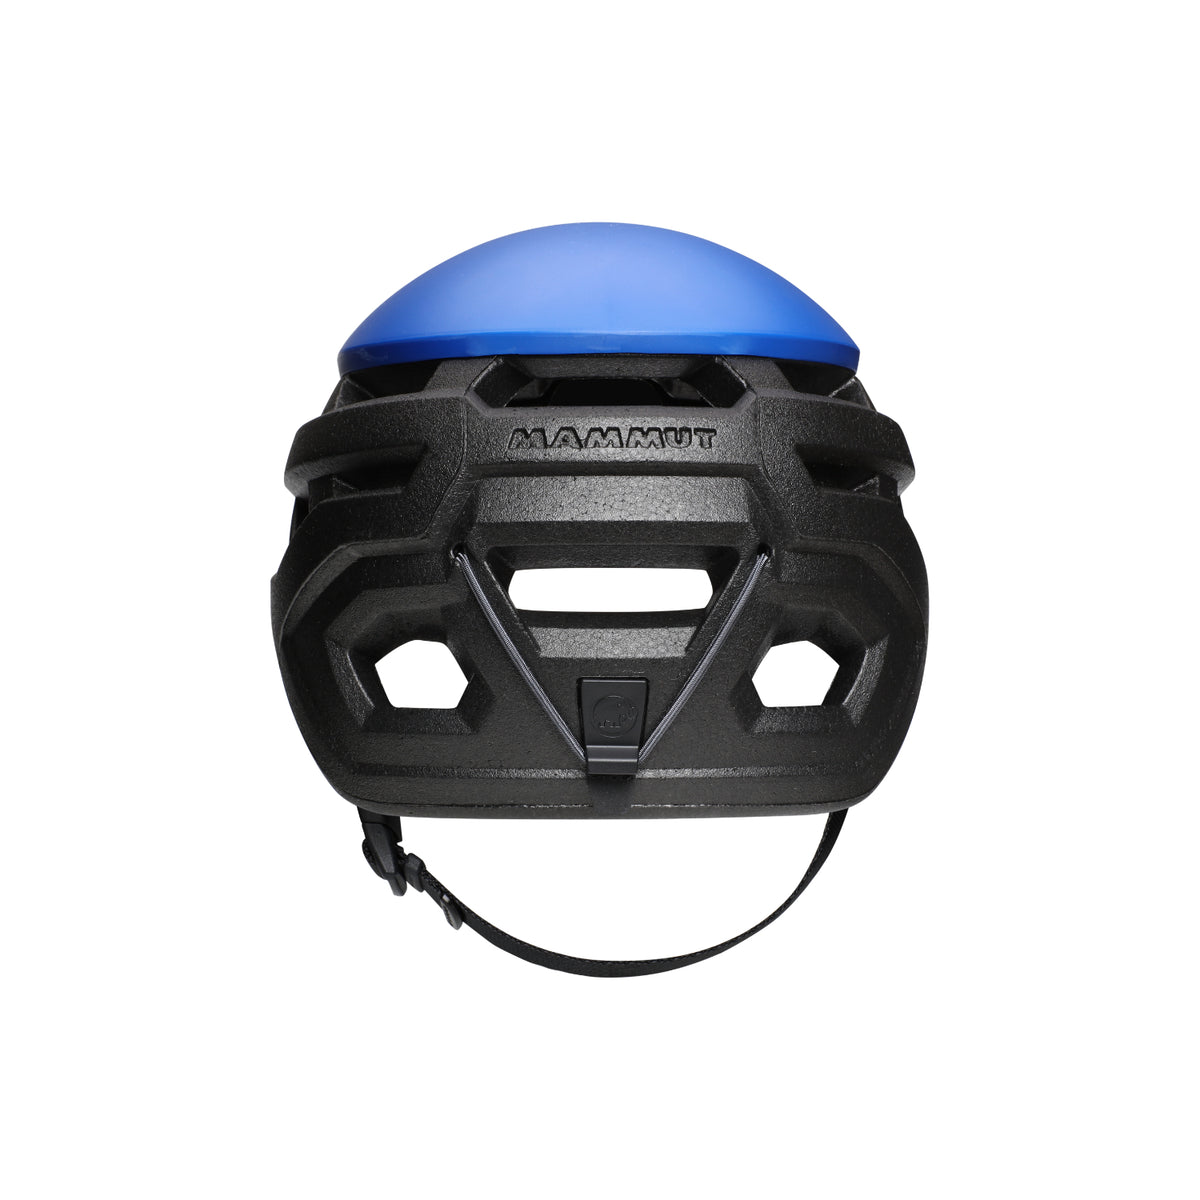 Mammut Wall Rider helmet in surf blue and black colour, from the rear view